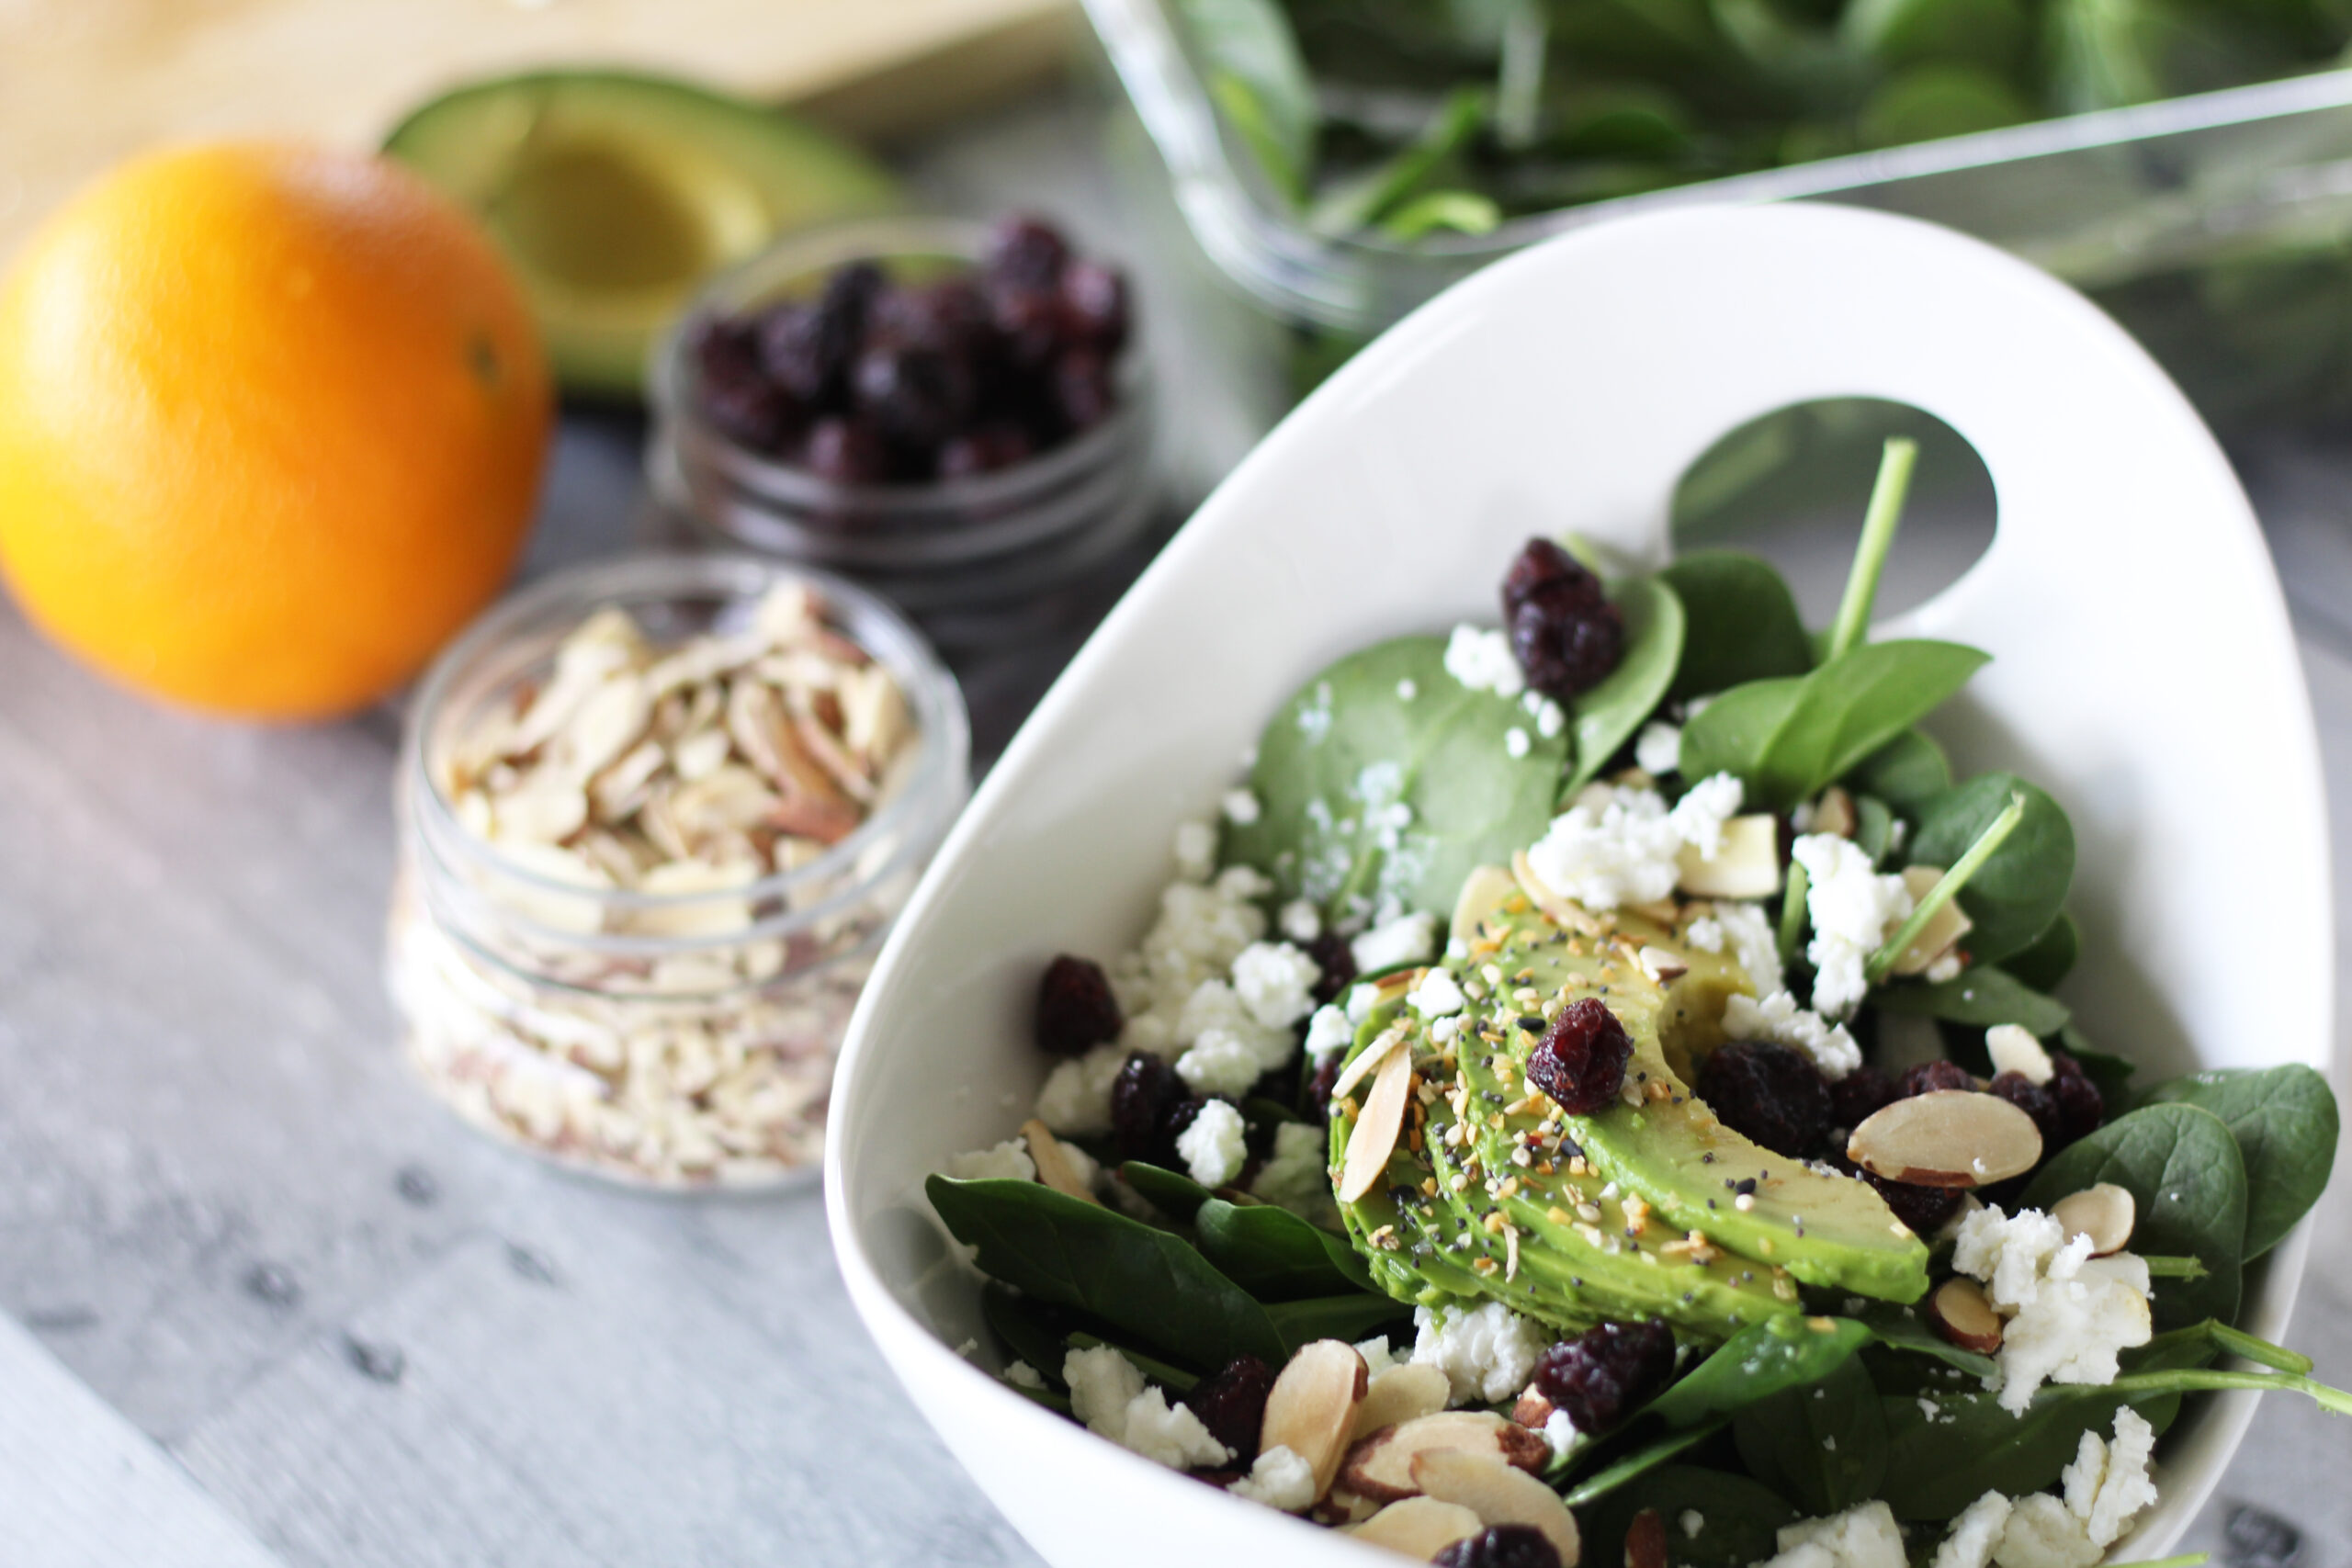 Spinach Salad with Cranberries, Almonds and Goat Cheese